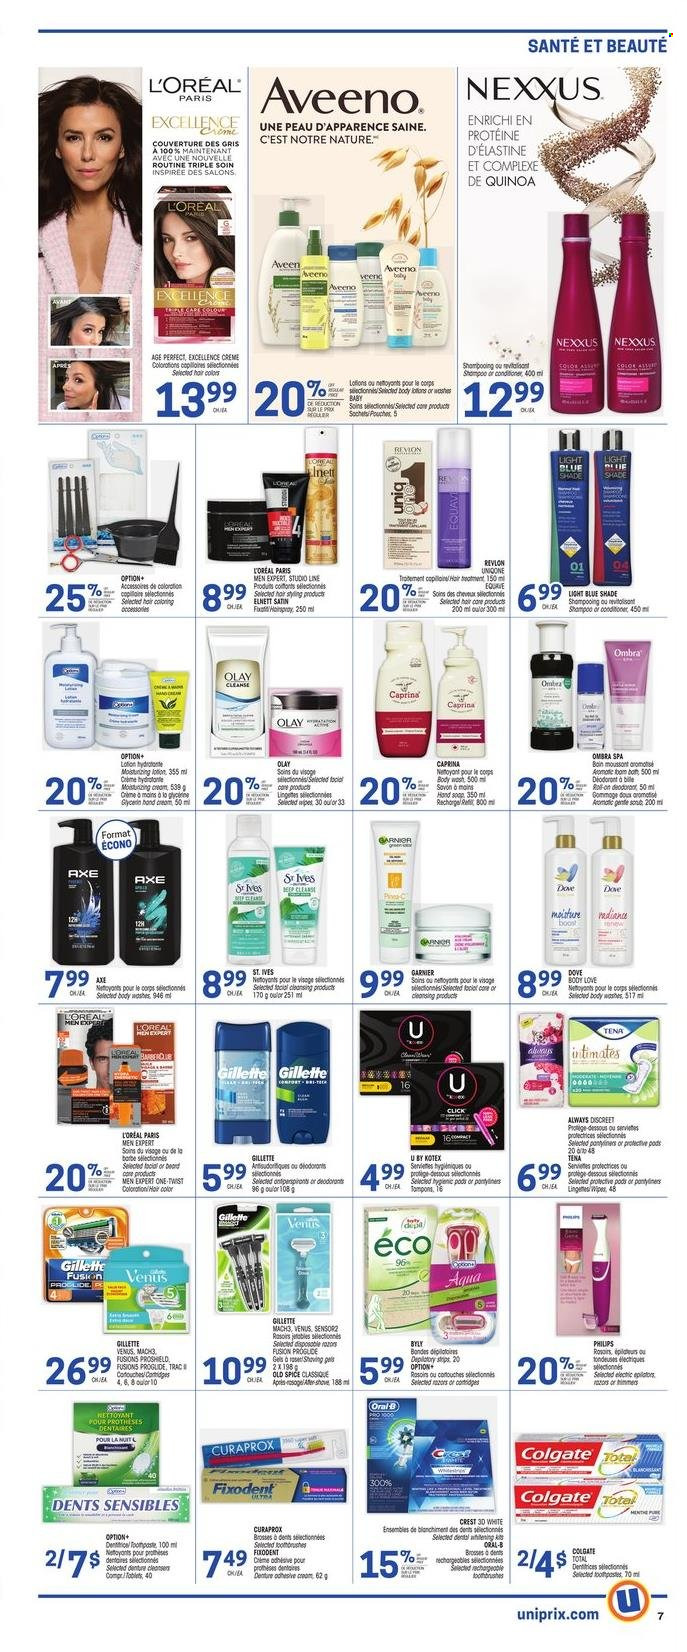 thumbnail - Uniprix Flyer - February 02, 2023 - February 08, 2023 - Sales products - Dove, cereals, spice, Boost, wipes, Aveeno, body wash, hand soap, Mousson, soap, Fixodent, Crest, Always Discreet, Kotex, pantyliners, tampons, Gillette, L’Oréal, Olay, L’Oréal Men, conditioner, hair color, Nexxus, body lotion, anti-perspirant, roll-on, Axe, Venus, magnesium, Colgate, Garnier, quinoa, shampoo, Old Spice, Oral-B, deodorant. Page 6.